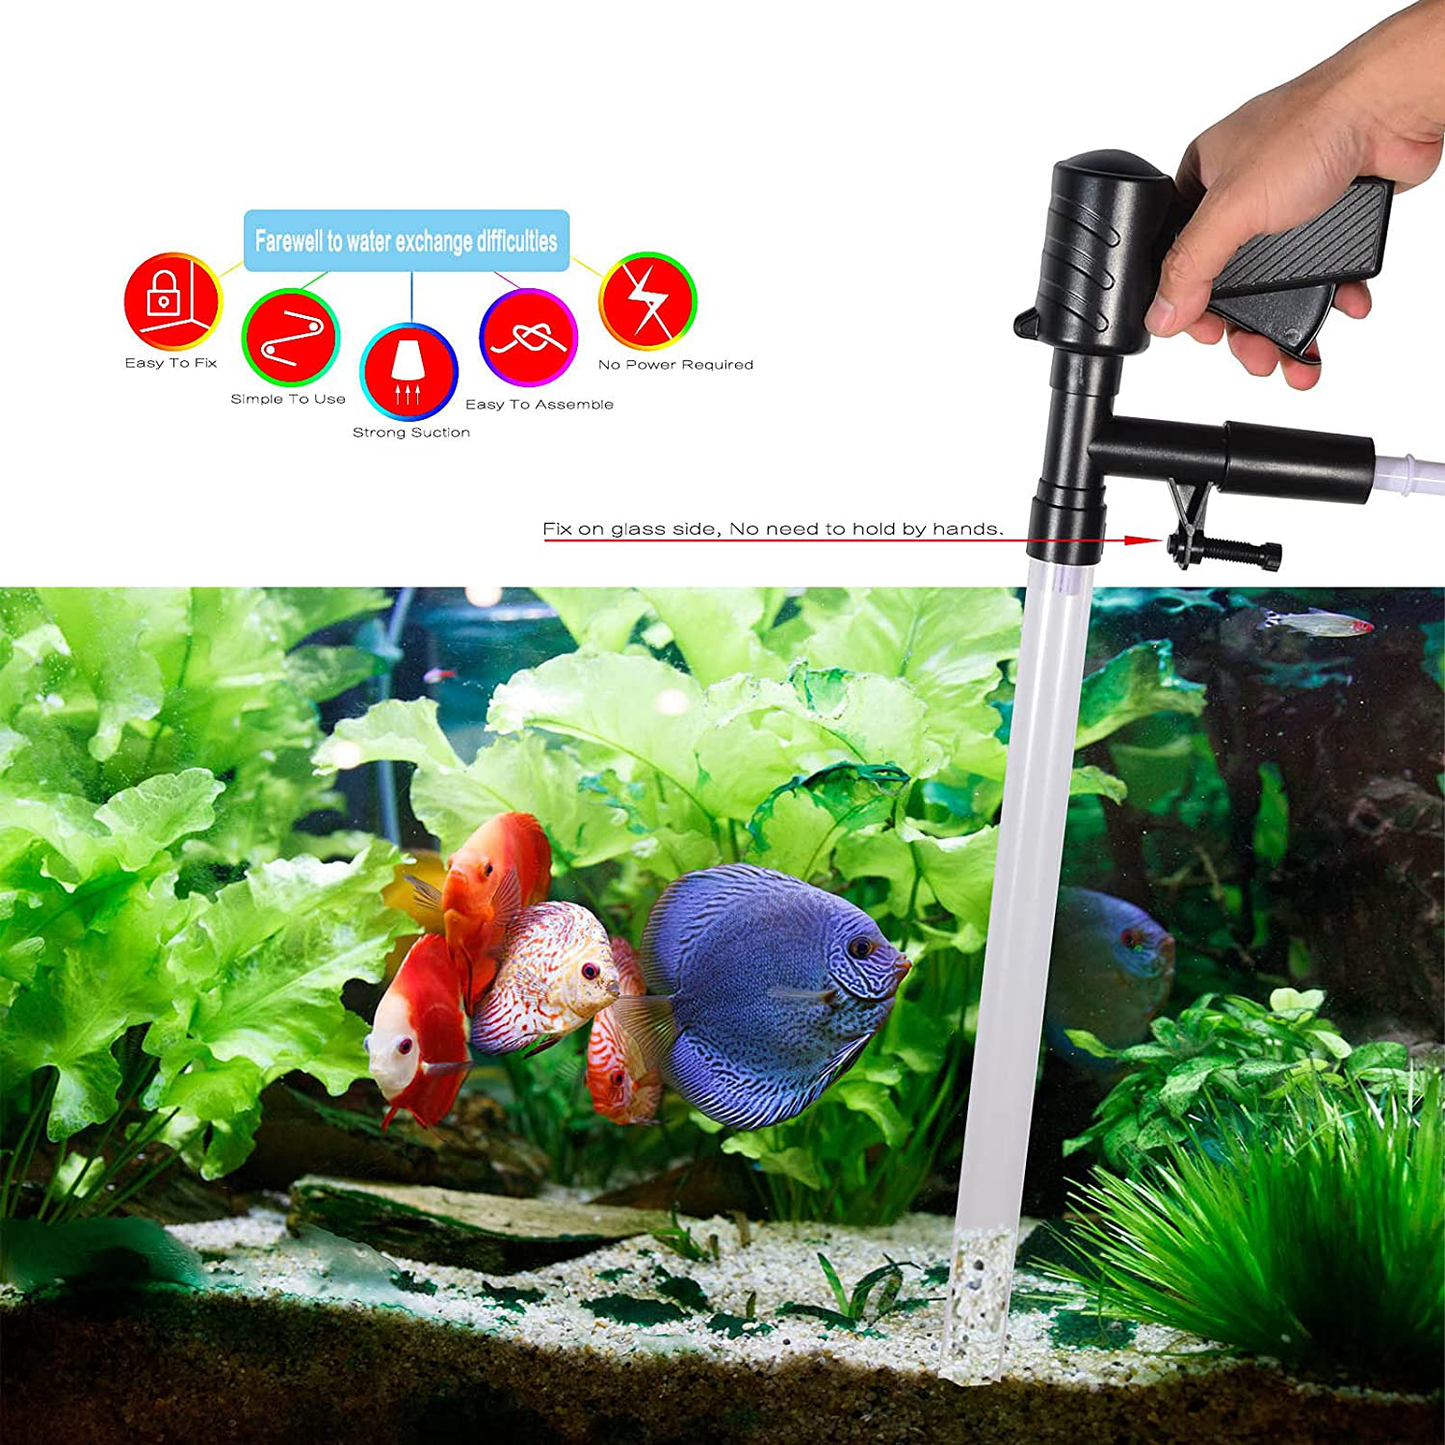 Arinbow Aquarium Gravel Cleaner, New Quick Water Changer with Air-Pressing Button Fish Tank Sand Aquarium Siphon Vacuum Cleaner with Adjustable Water Flow Controller (Upgrade Design), 7 Piece Set Animals & Pet Supplies > Pet Supplies > Fish Supplies > Aquarium Cleaning Supplies Arinbow   